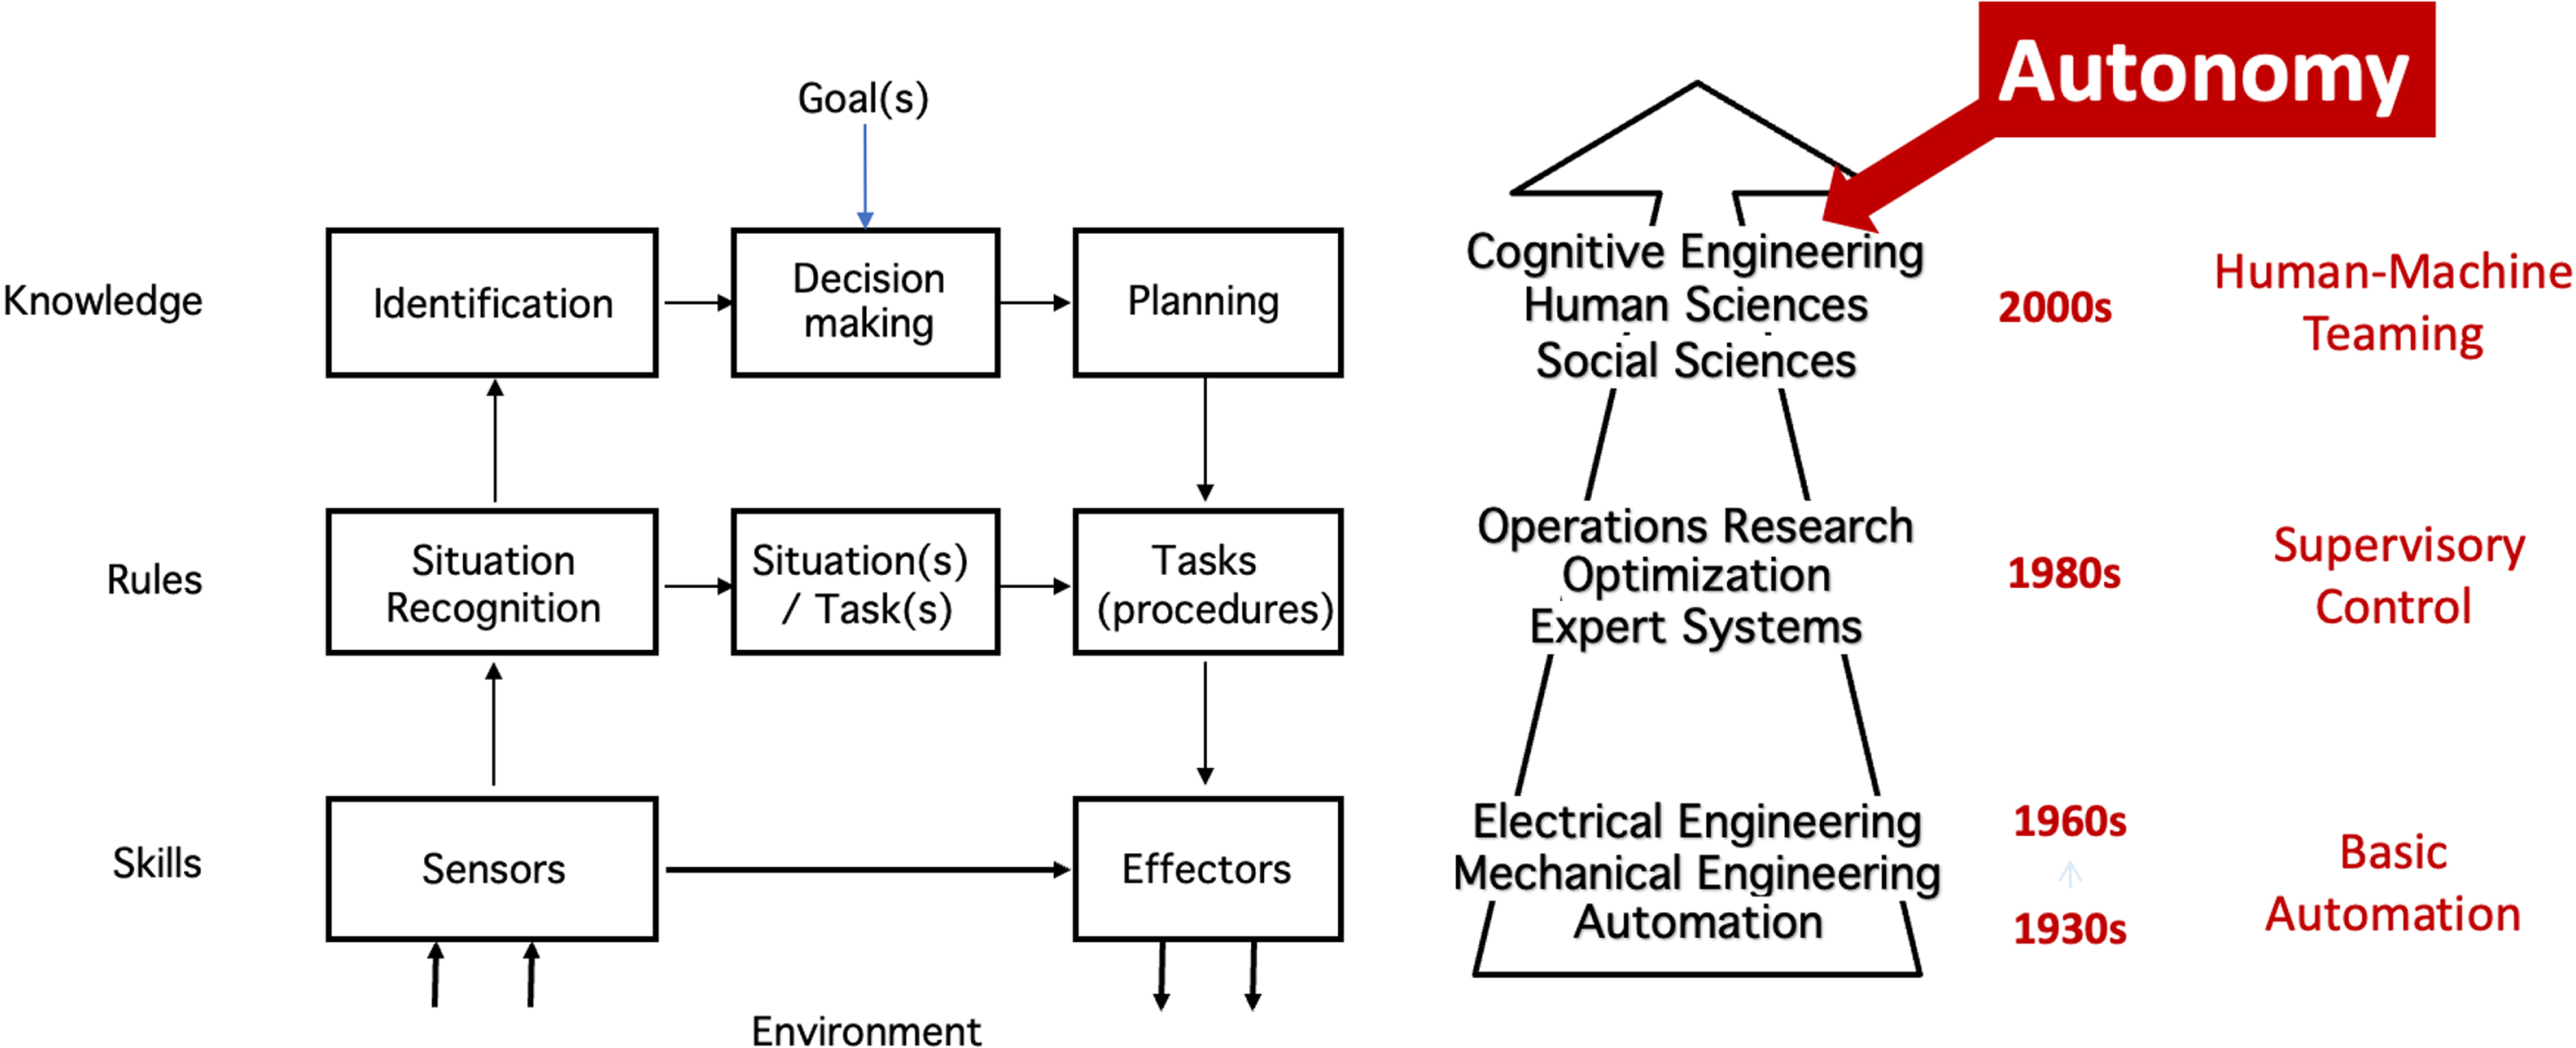 The evolution from automation to autonomy based on Rasmussen’s model.